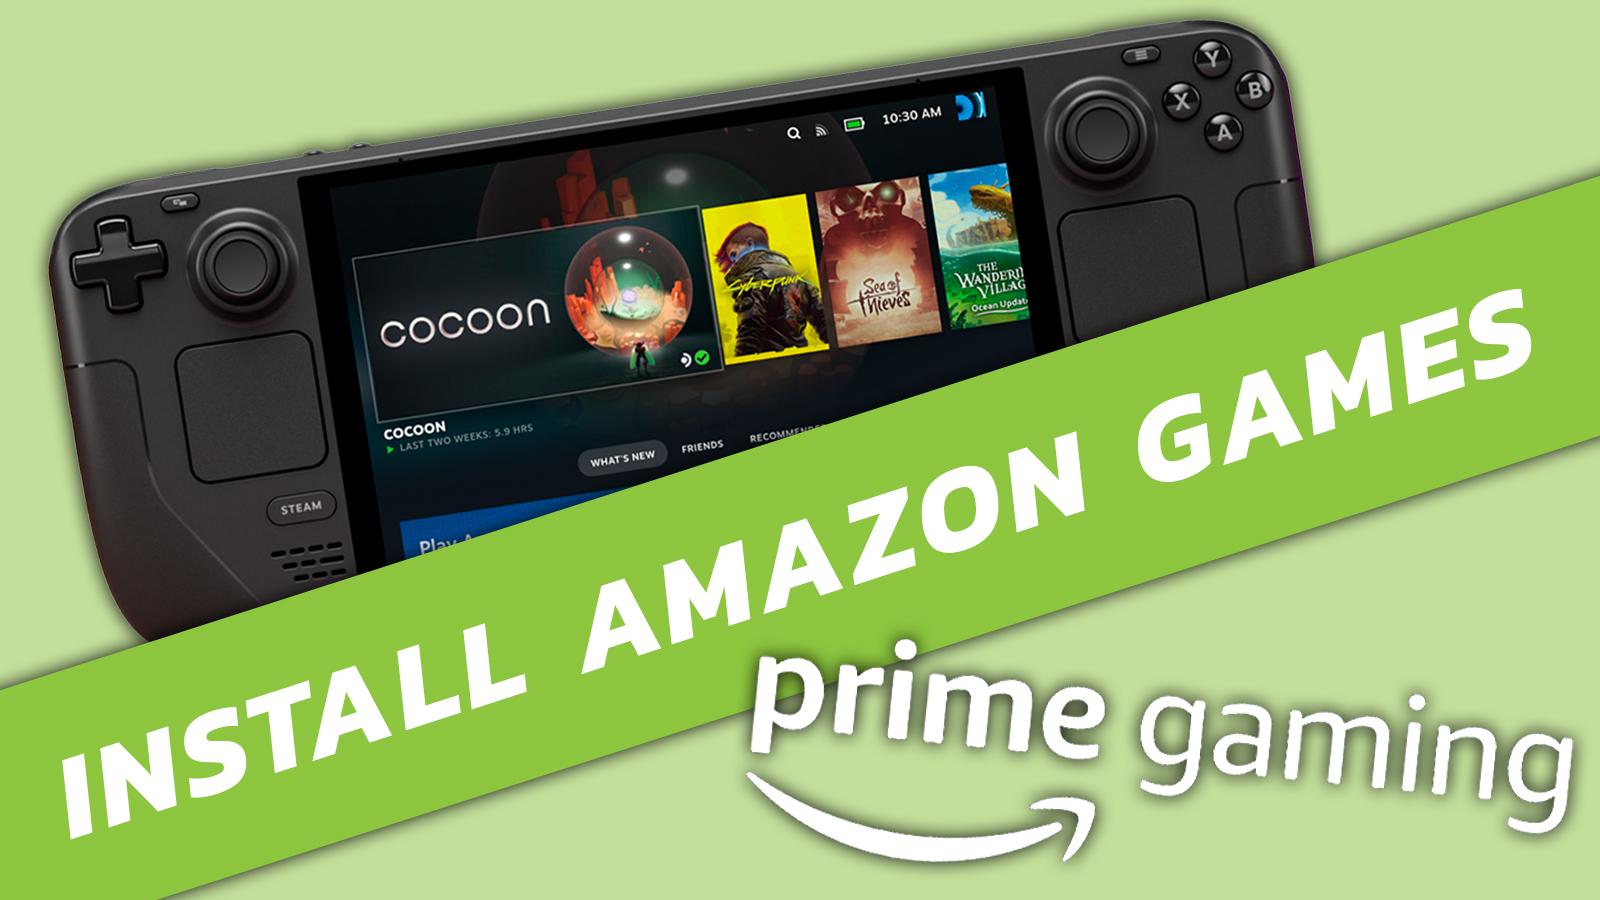 Prime Gaming: How To Download Free Games And More